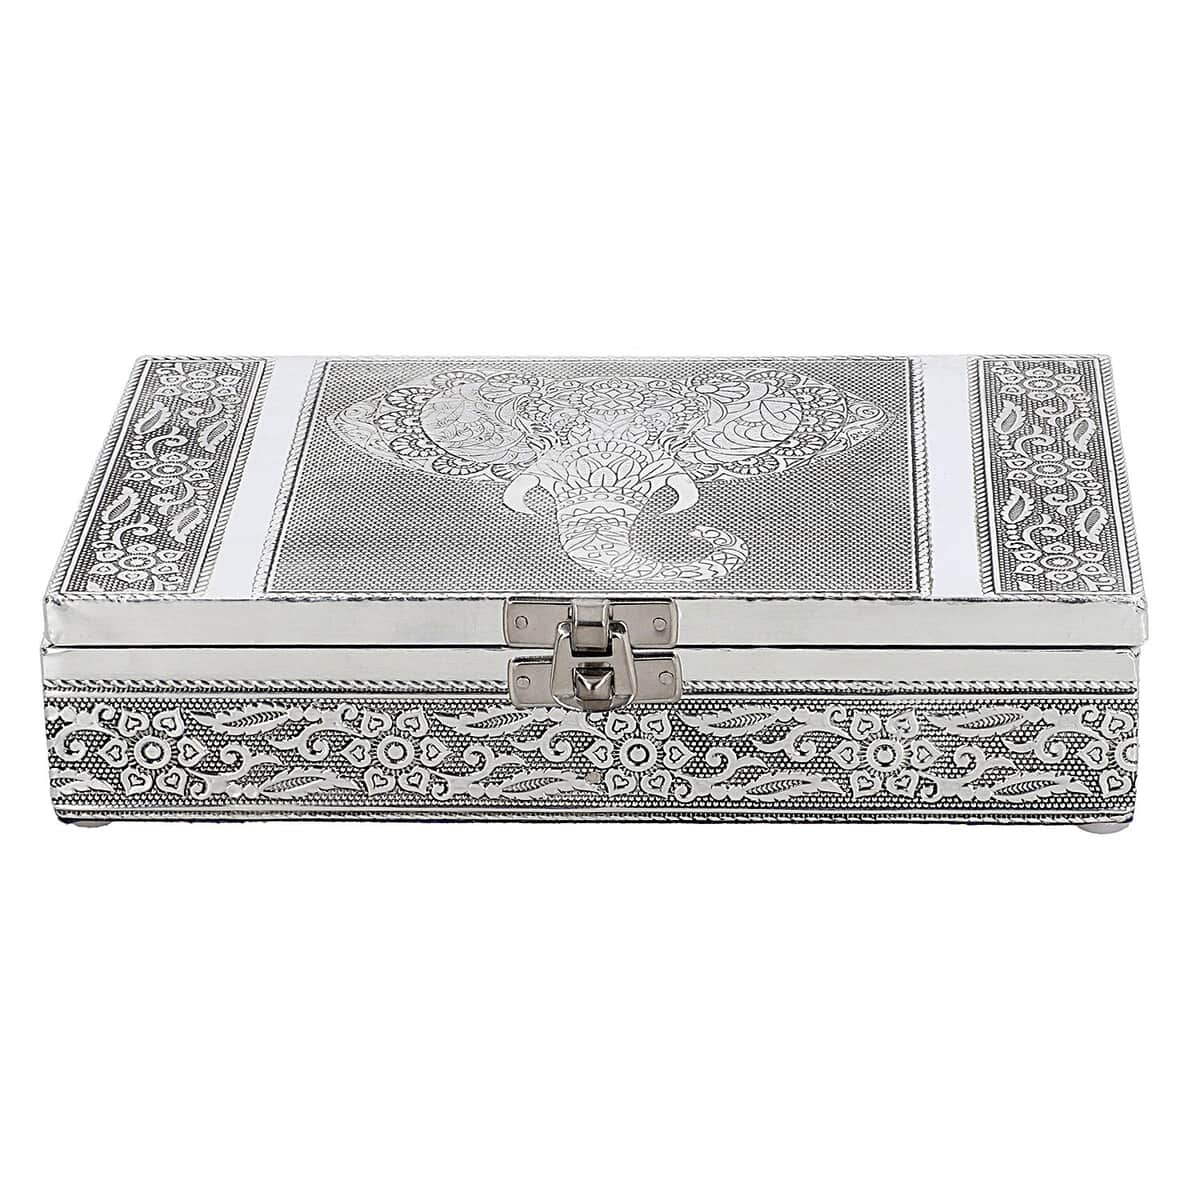 ADI'S EXCLUSIVE DEAL Aluminum Oxidized Elephant Face Pattern Half Empty and Half Ring Storage Jewelry Box with Anti Scratch Protection Interior image number 2